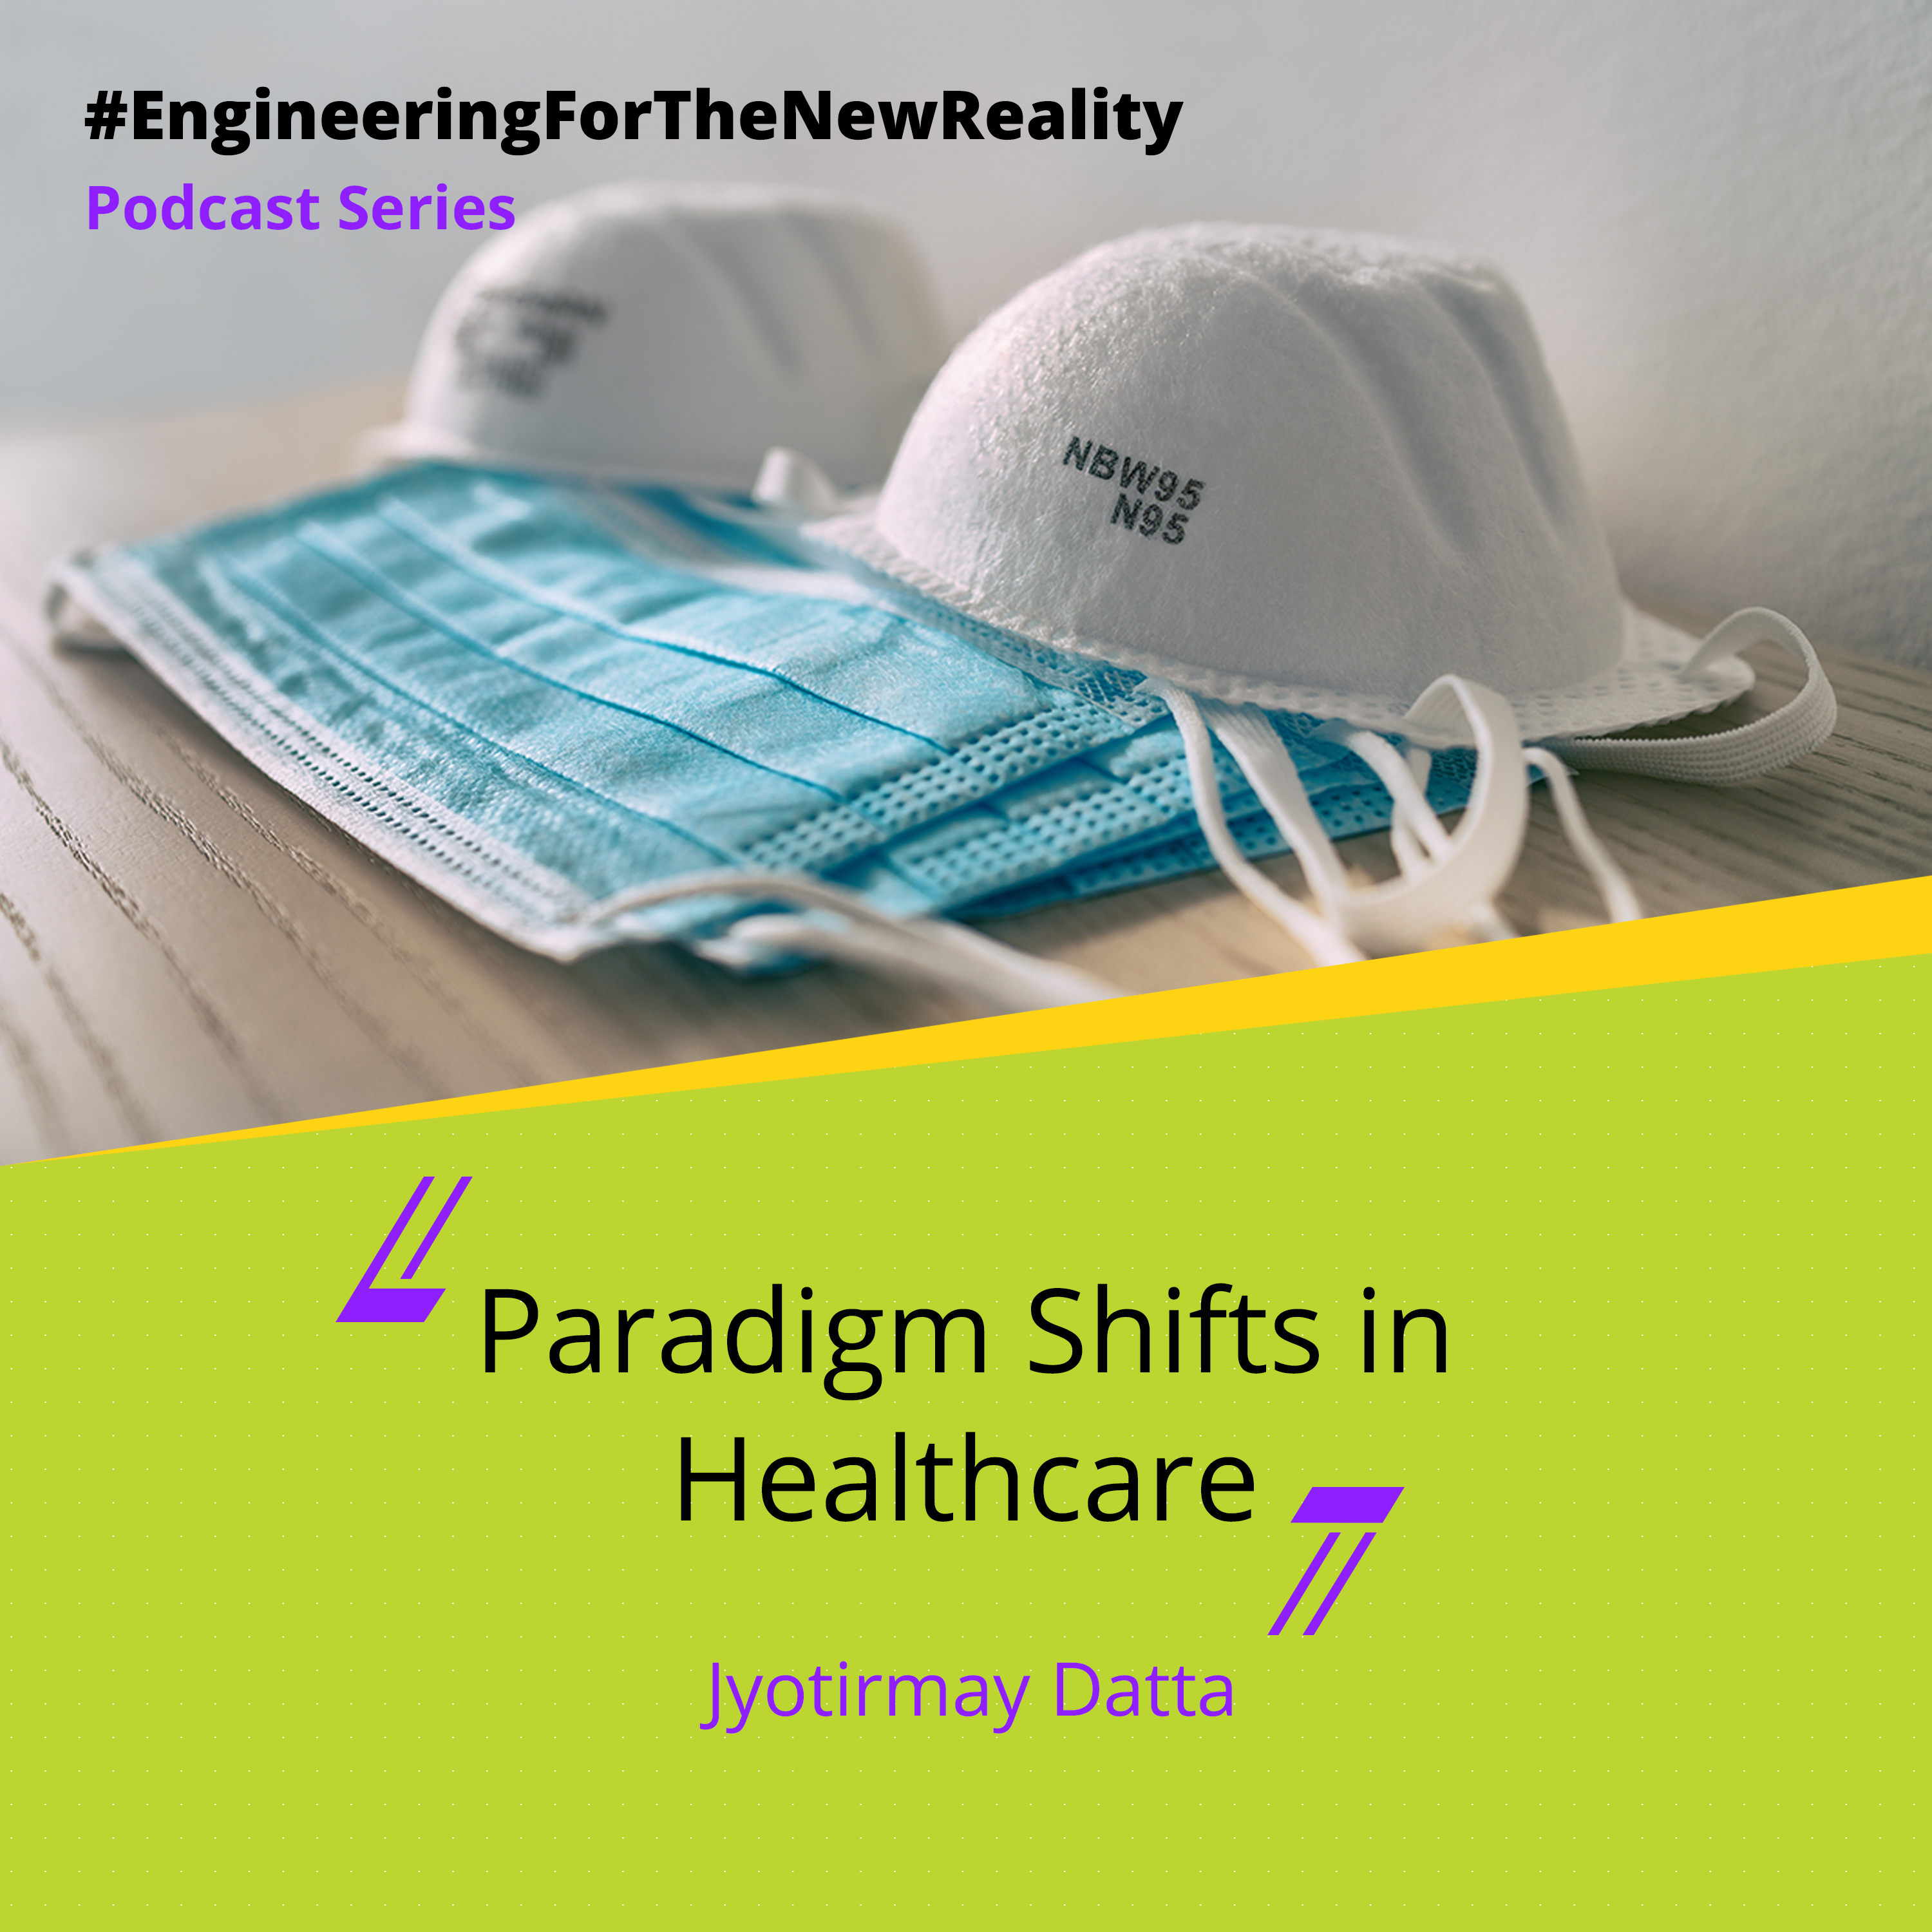 Paradigm Shifts in Healthcare